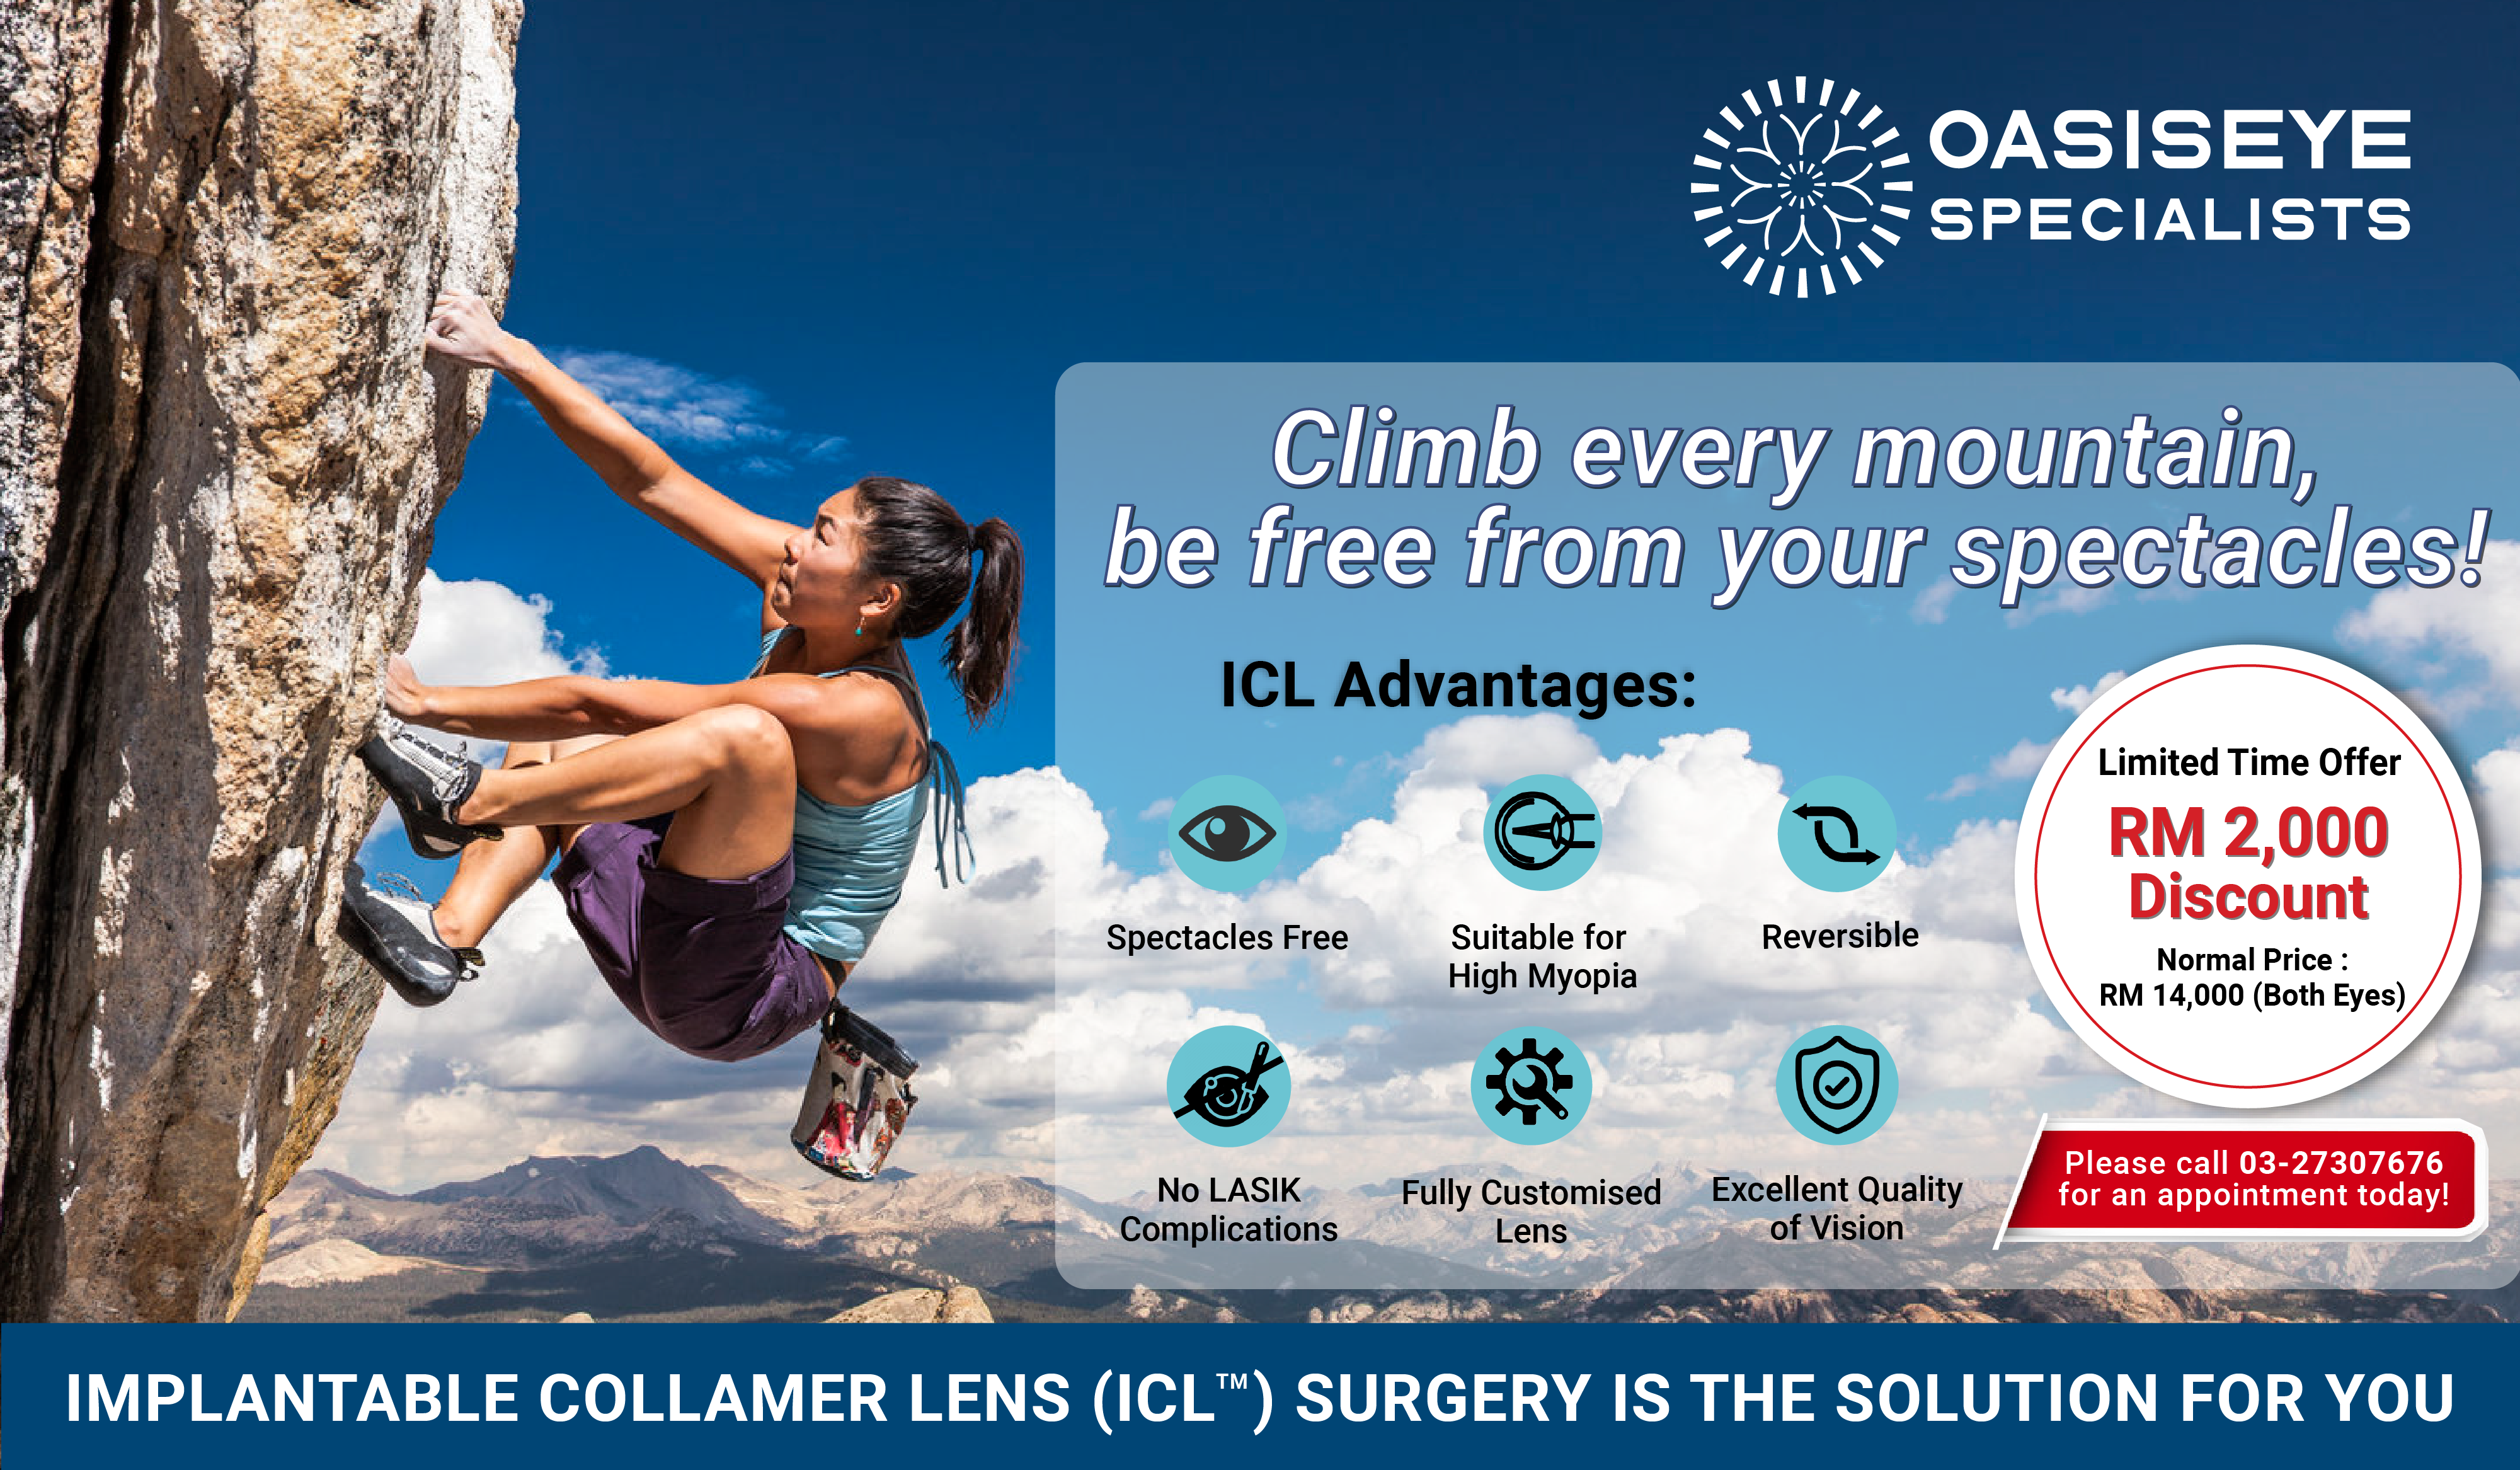 Implantable Collamer Lens (ICL) Surgery - Patient Testimonial